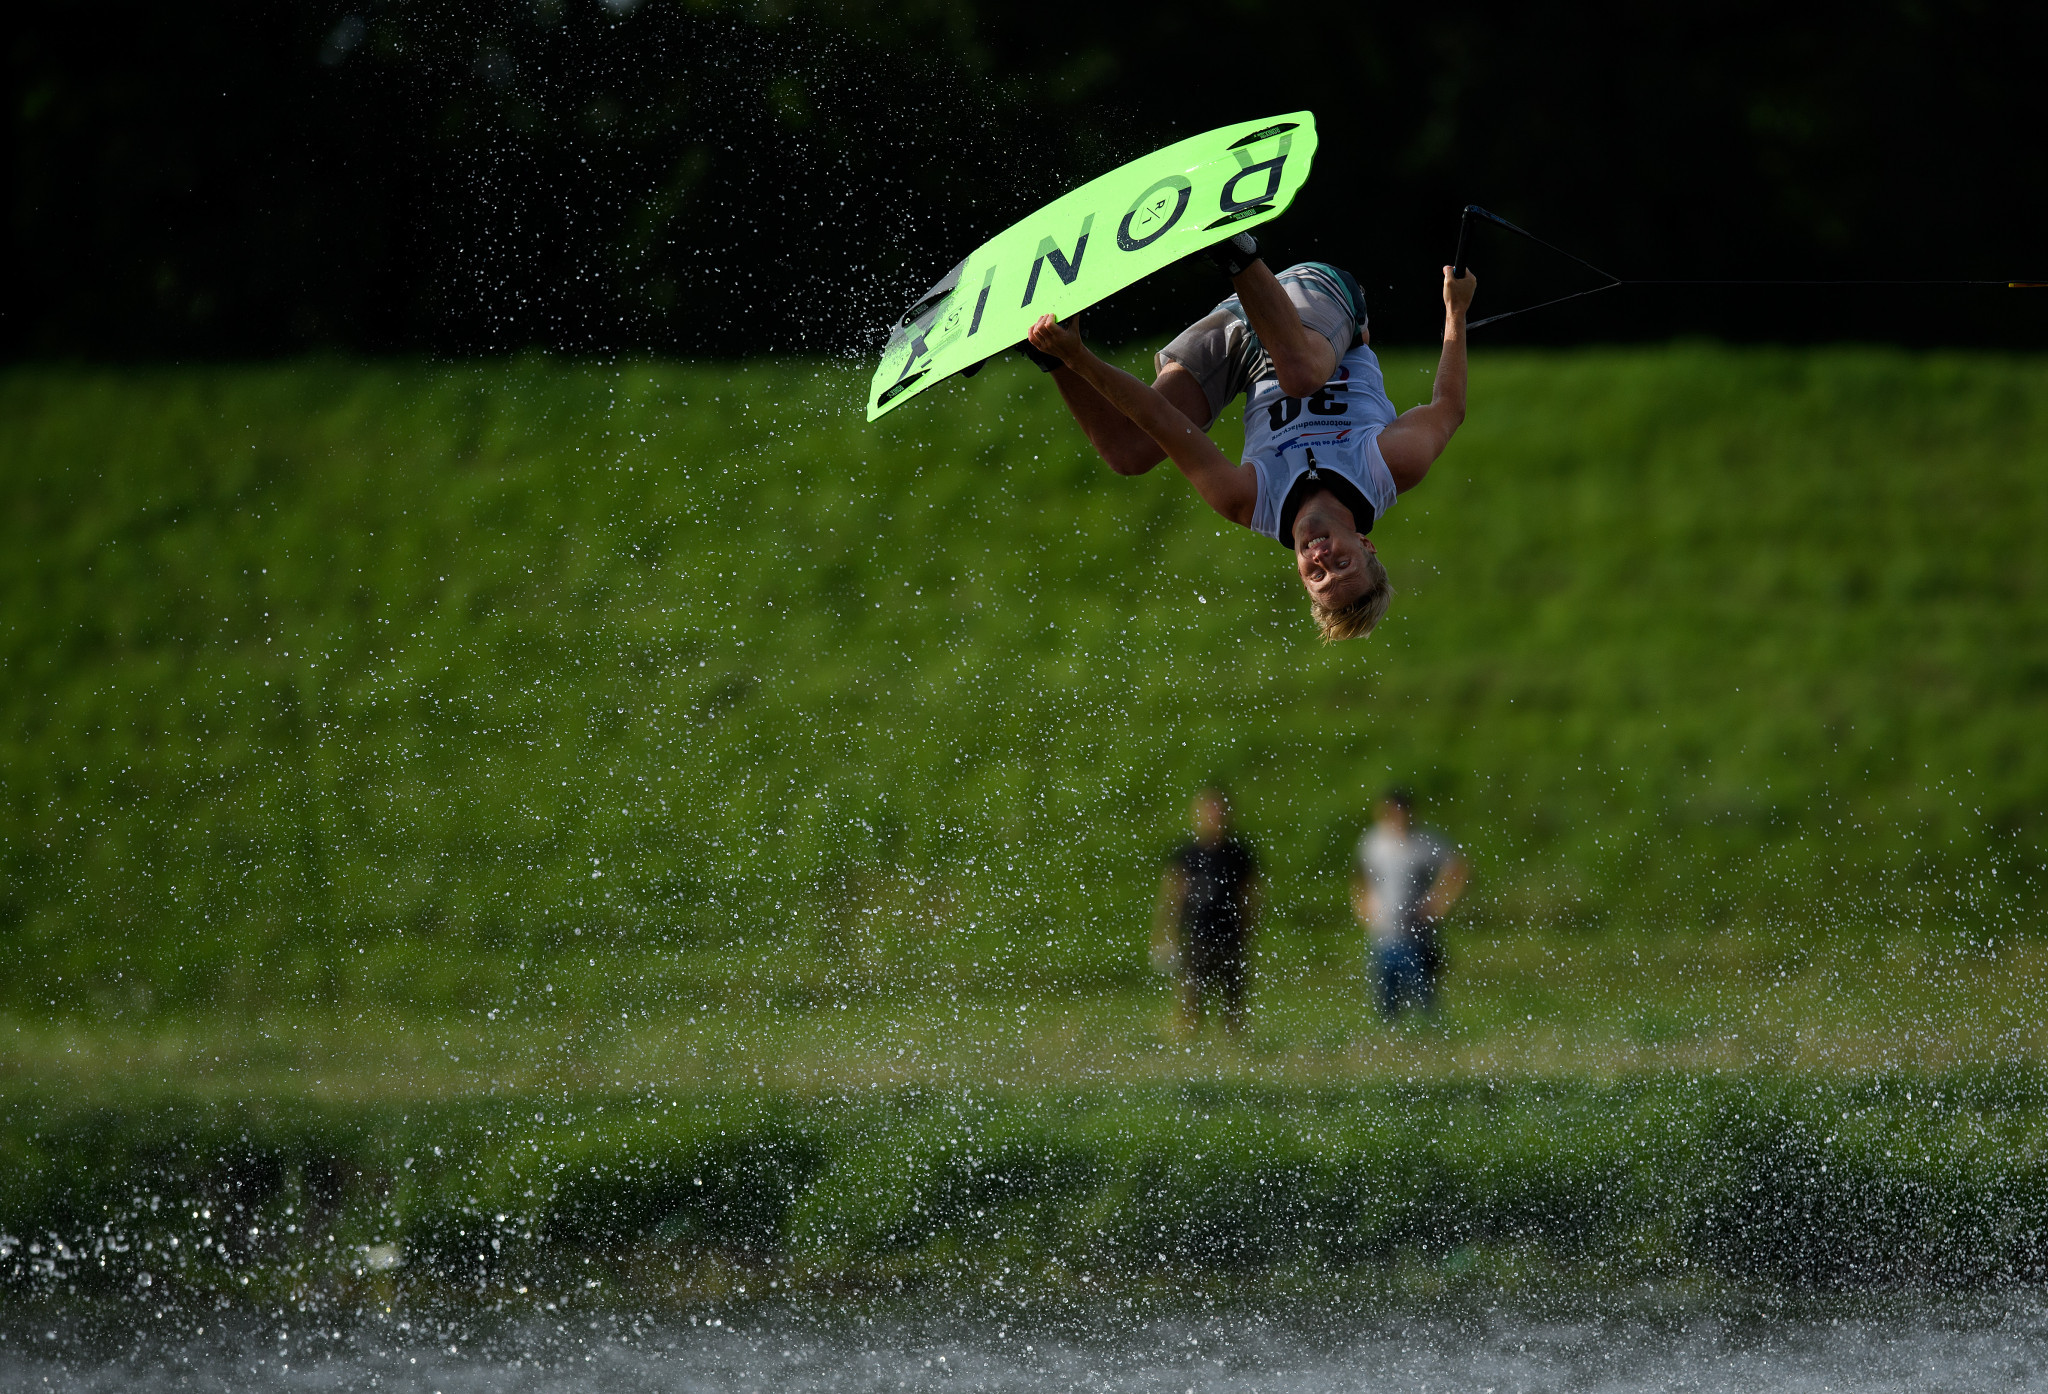 The agreement aims to promote both water skiing and wakeboarding in Jordan ©Getty Images